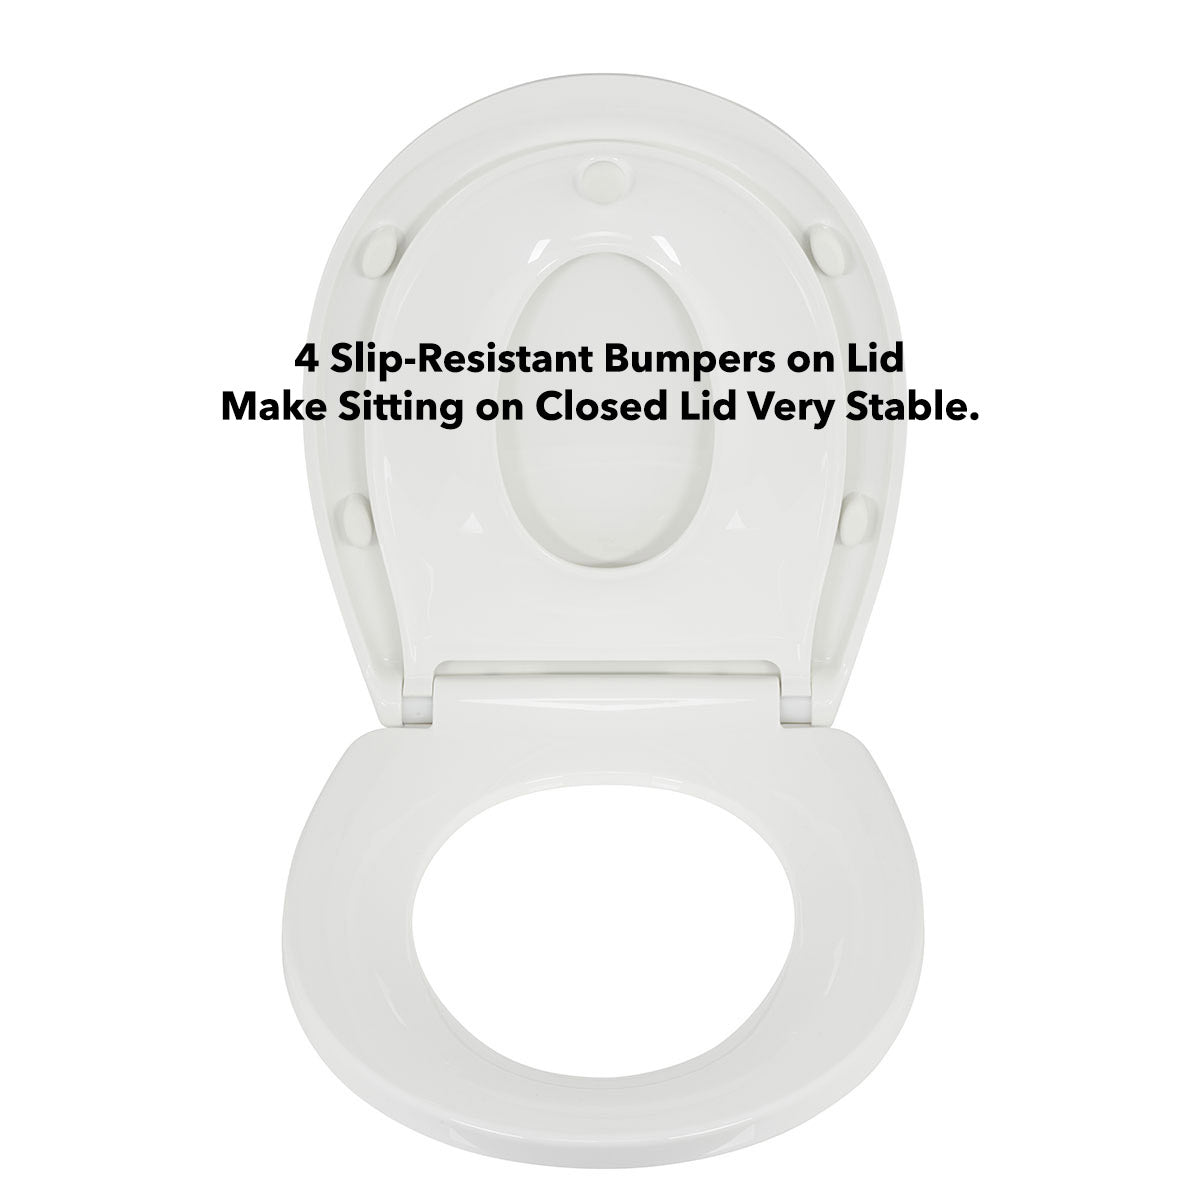 Kingsport Family Toilet Seat with Built-In Child Seat